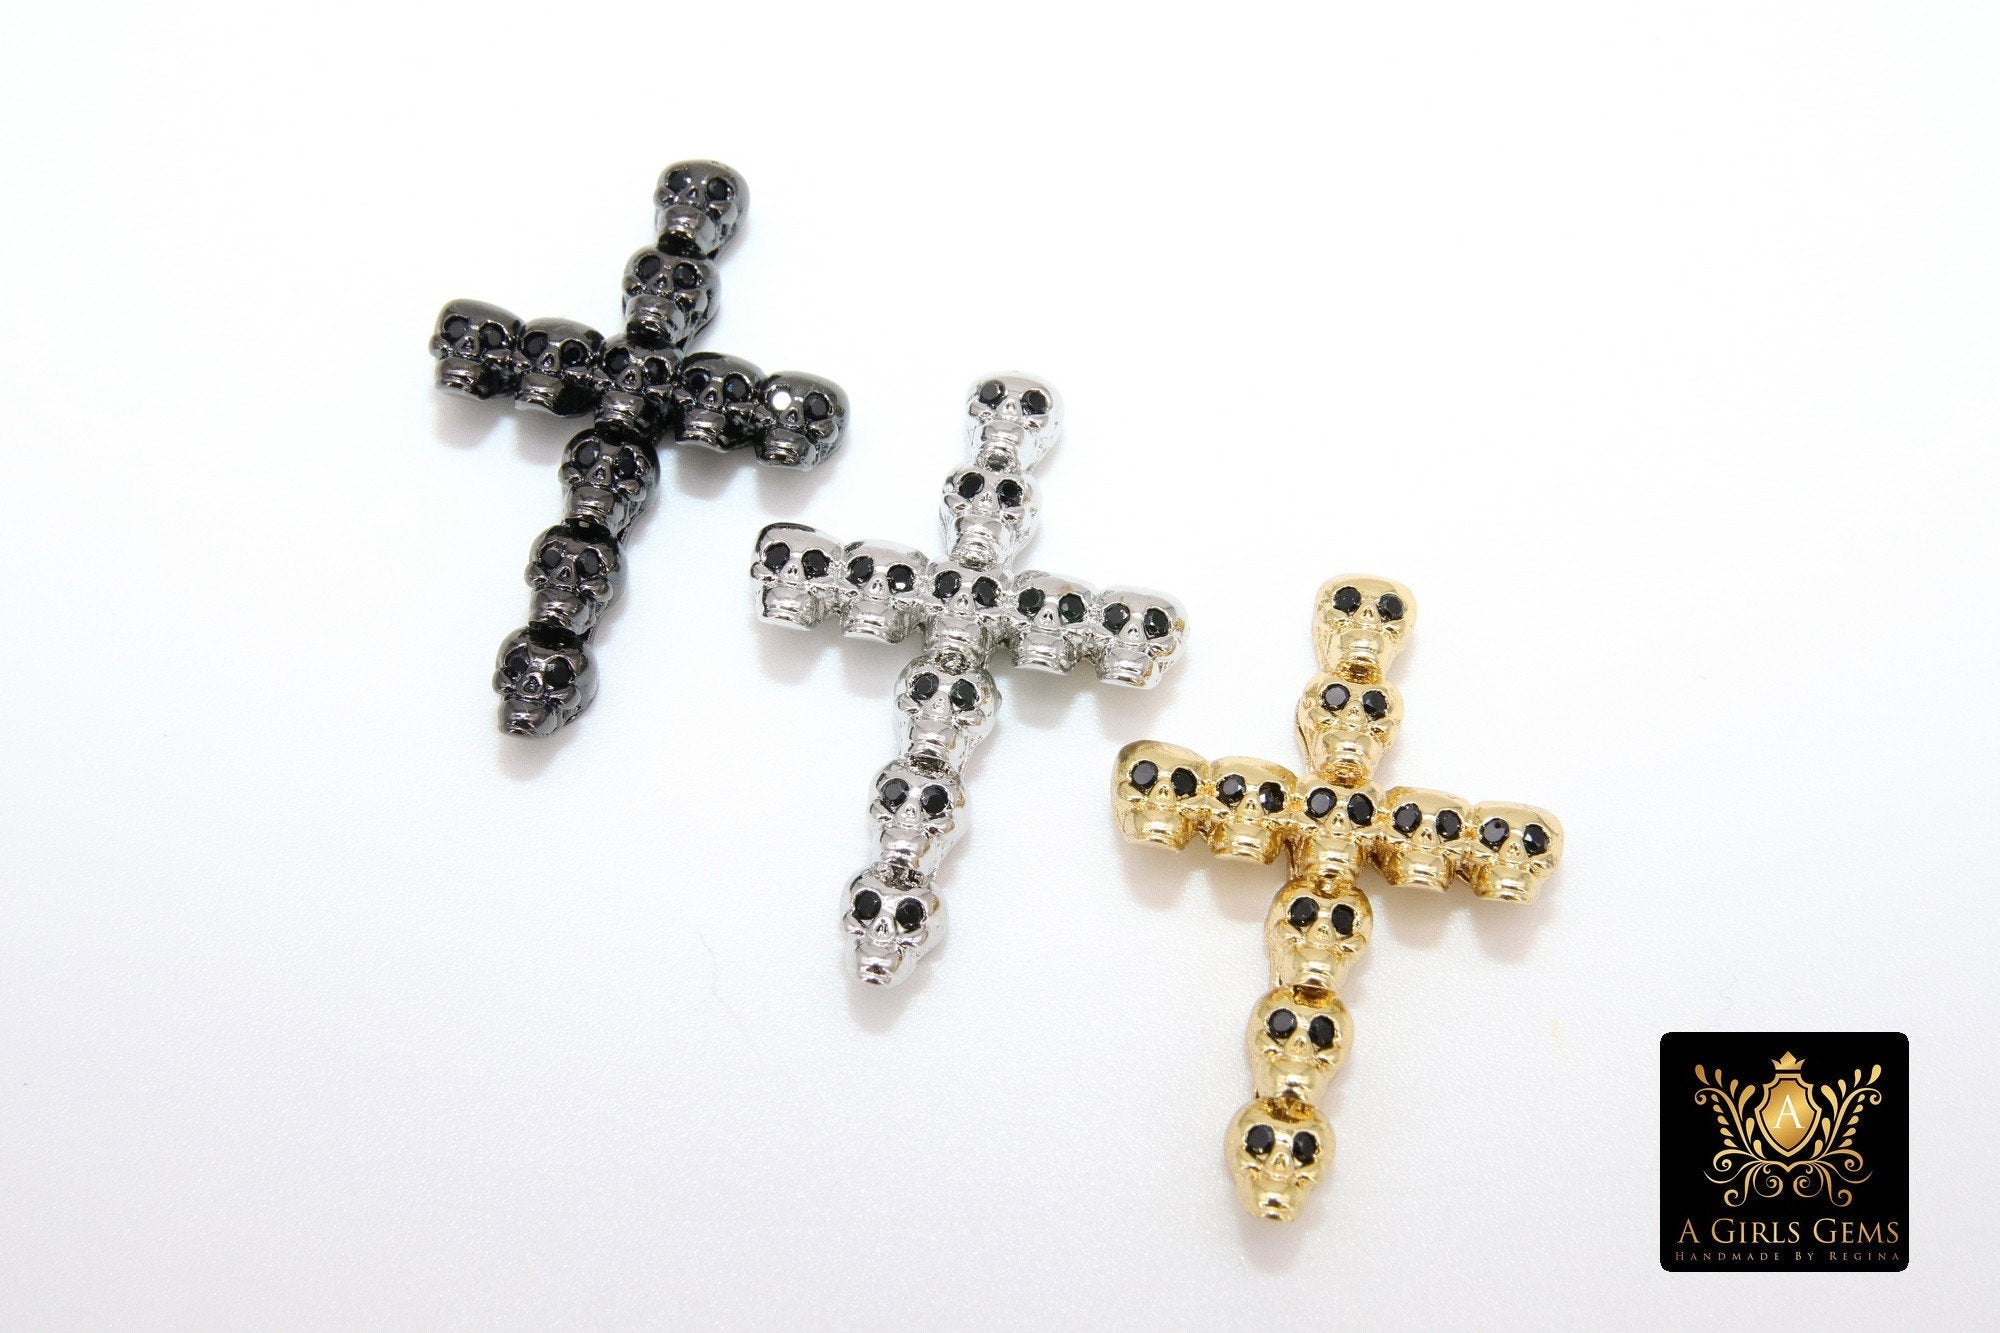 CZ Pave Skull Head Cross Charms, Gold, Black, Silver Necklace Skeleton Beads, Men's Jewelry #331 - A Girls Gems